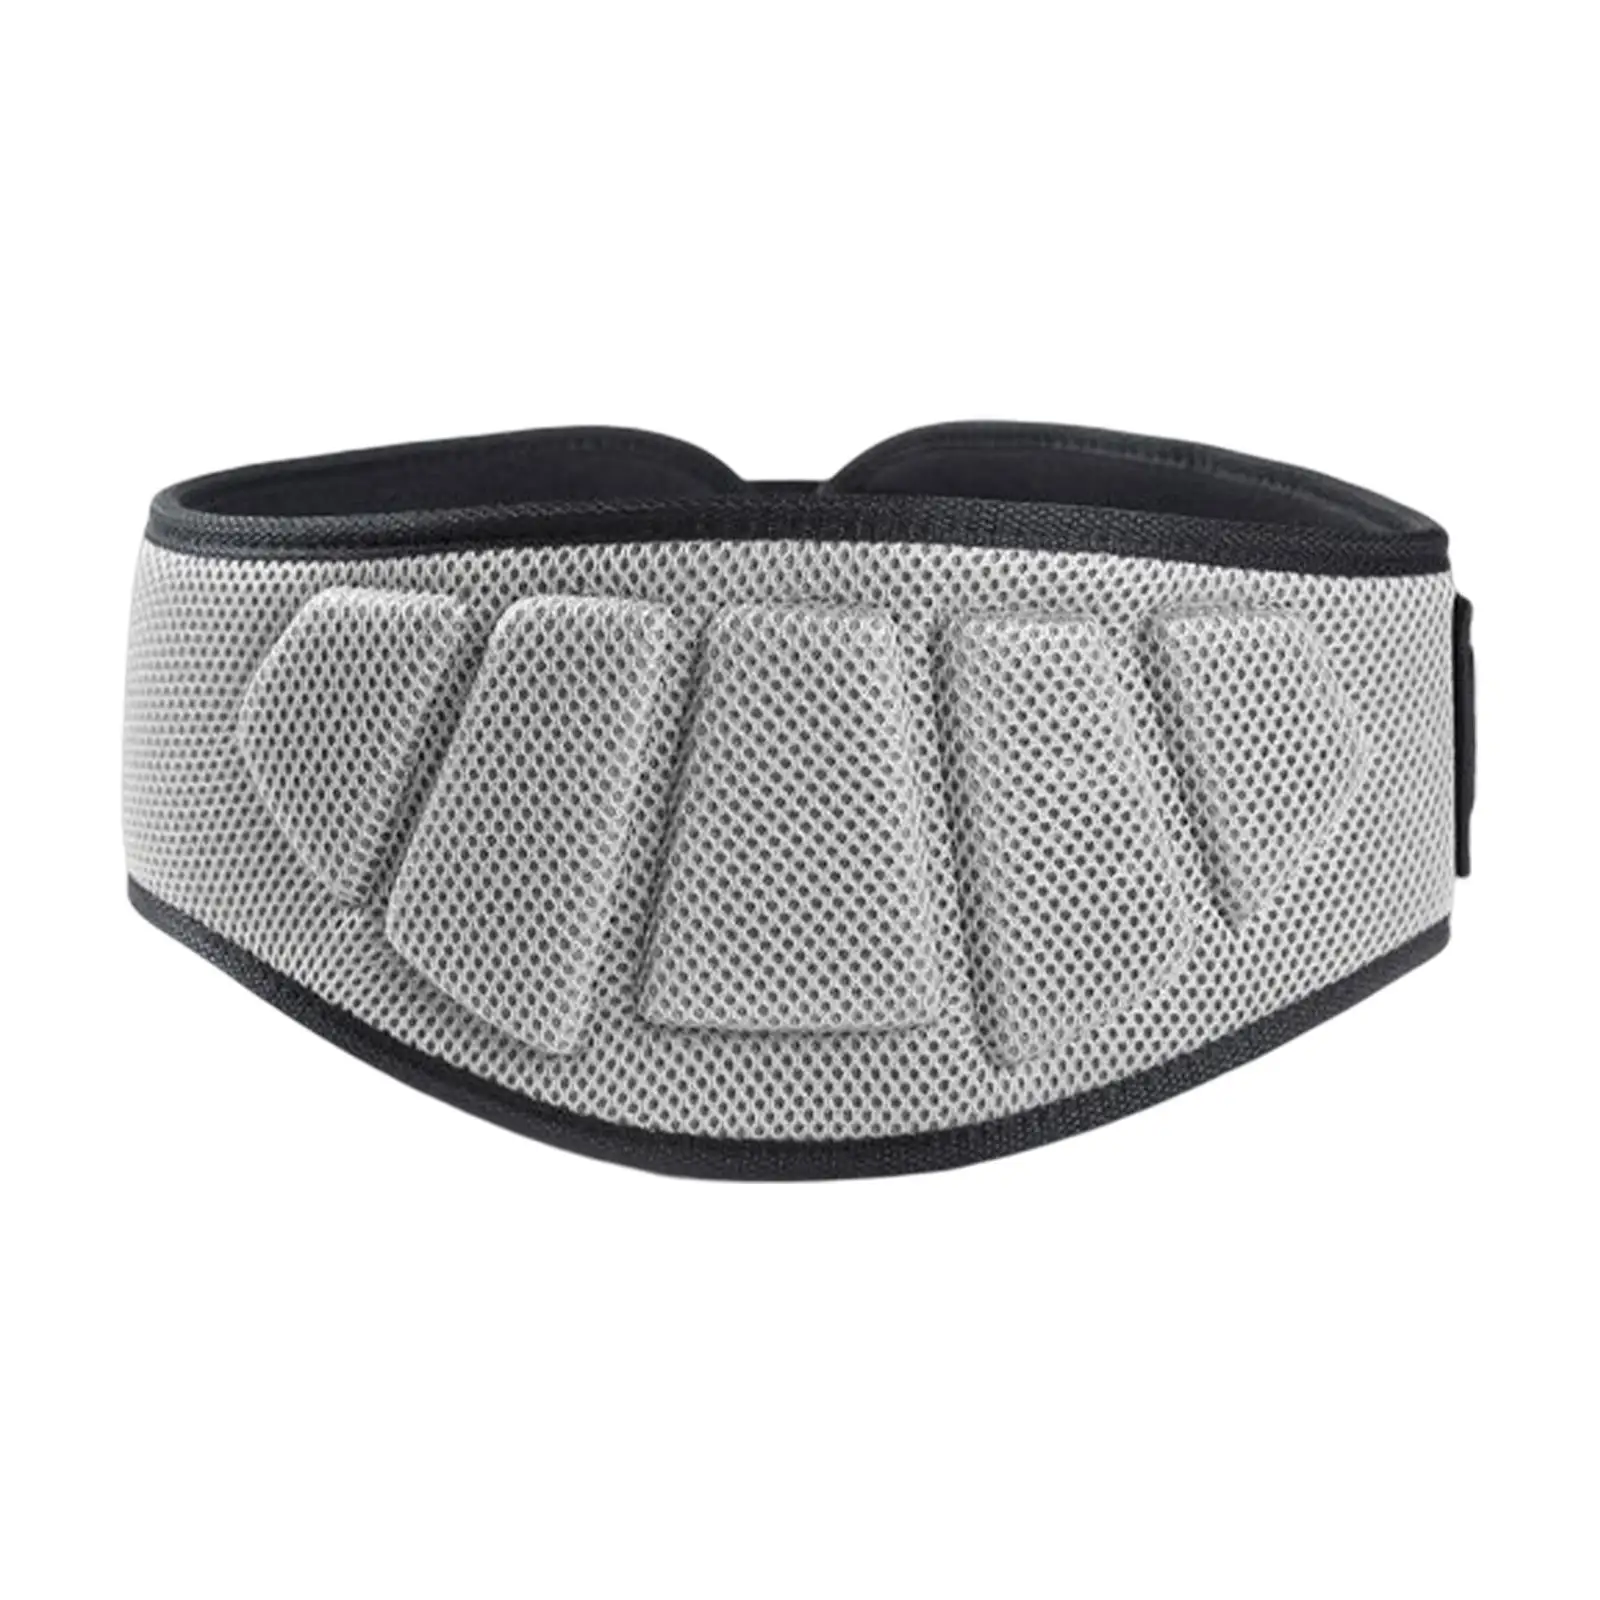 Weight Lifting Belt Waist Support Powerlifting Exercise Weightlifting Belt for Unisex